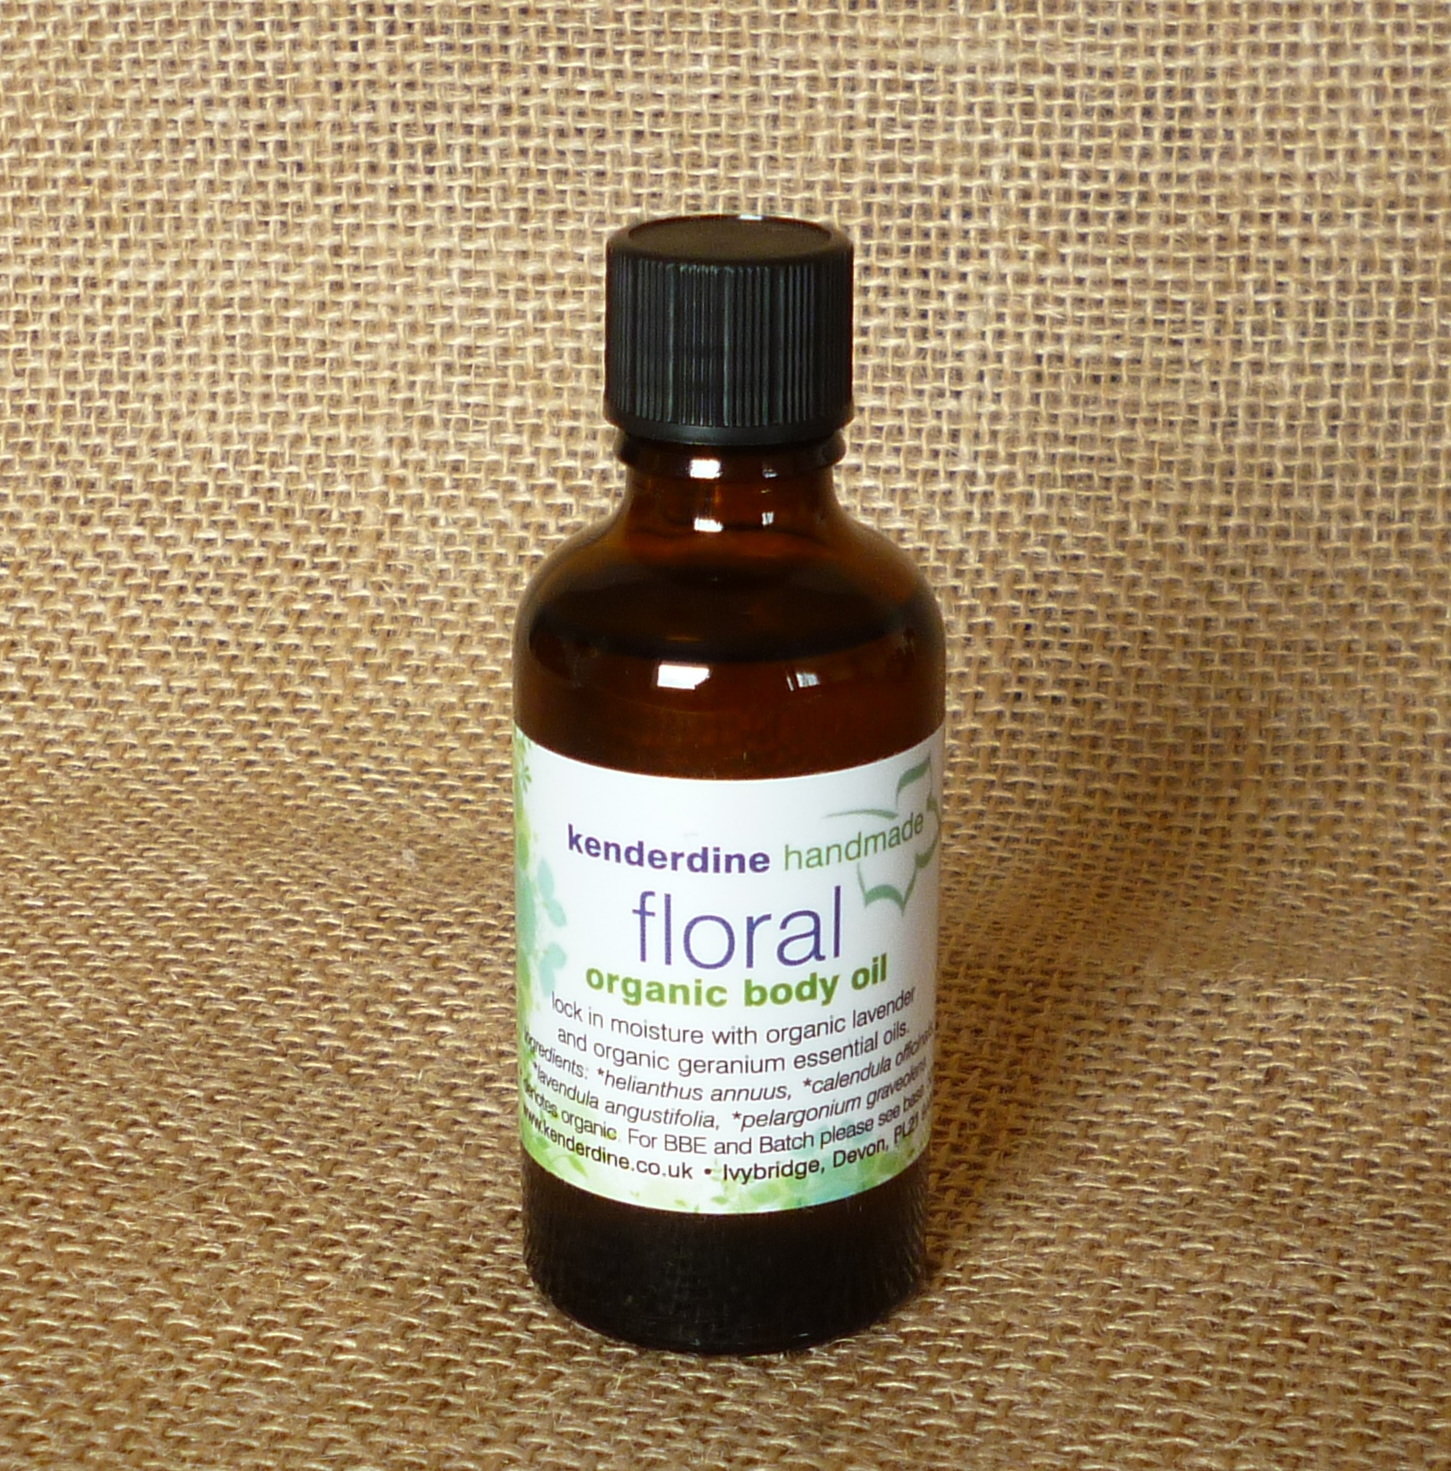 Floral body oil